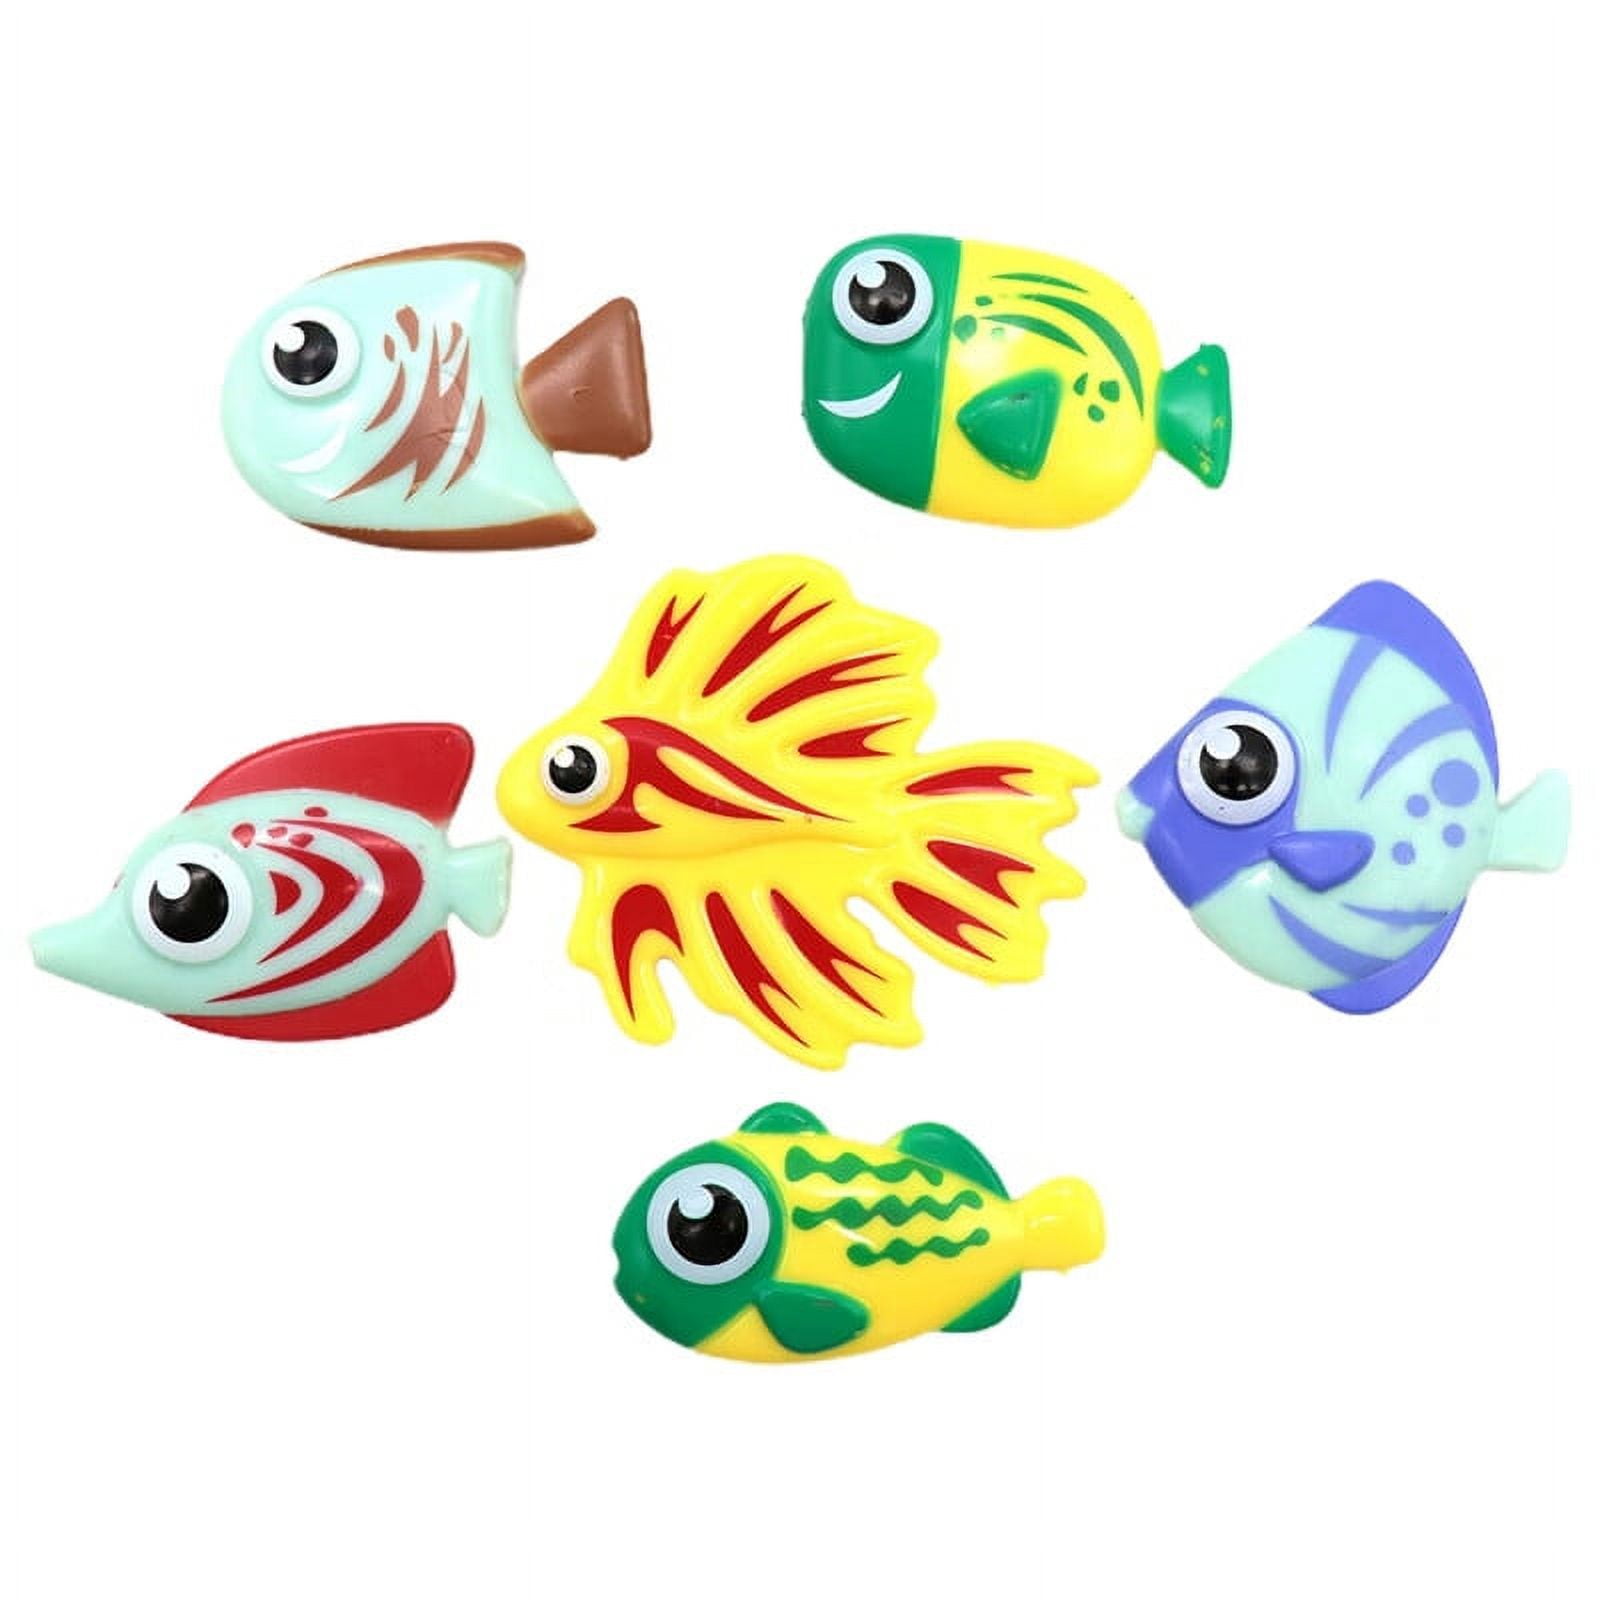 CozyBomB Magnetic Fishing Pool Toys Game for Kids - Water Table Bathtub Kiddie Party Toy with Pole Rod Net Plastic Floating Fish